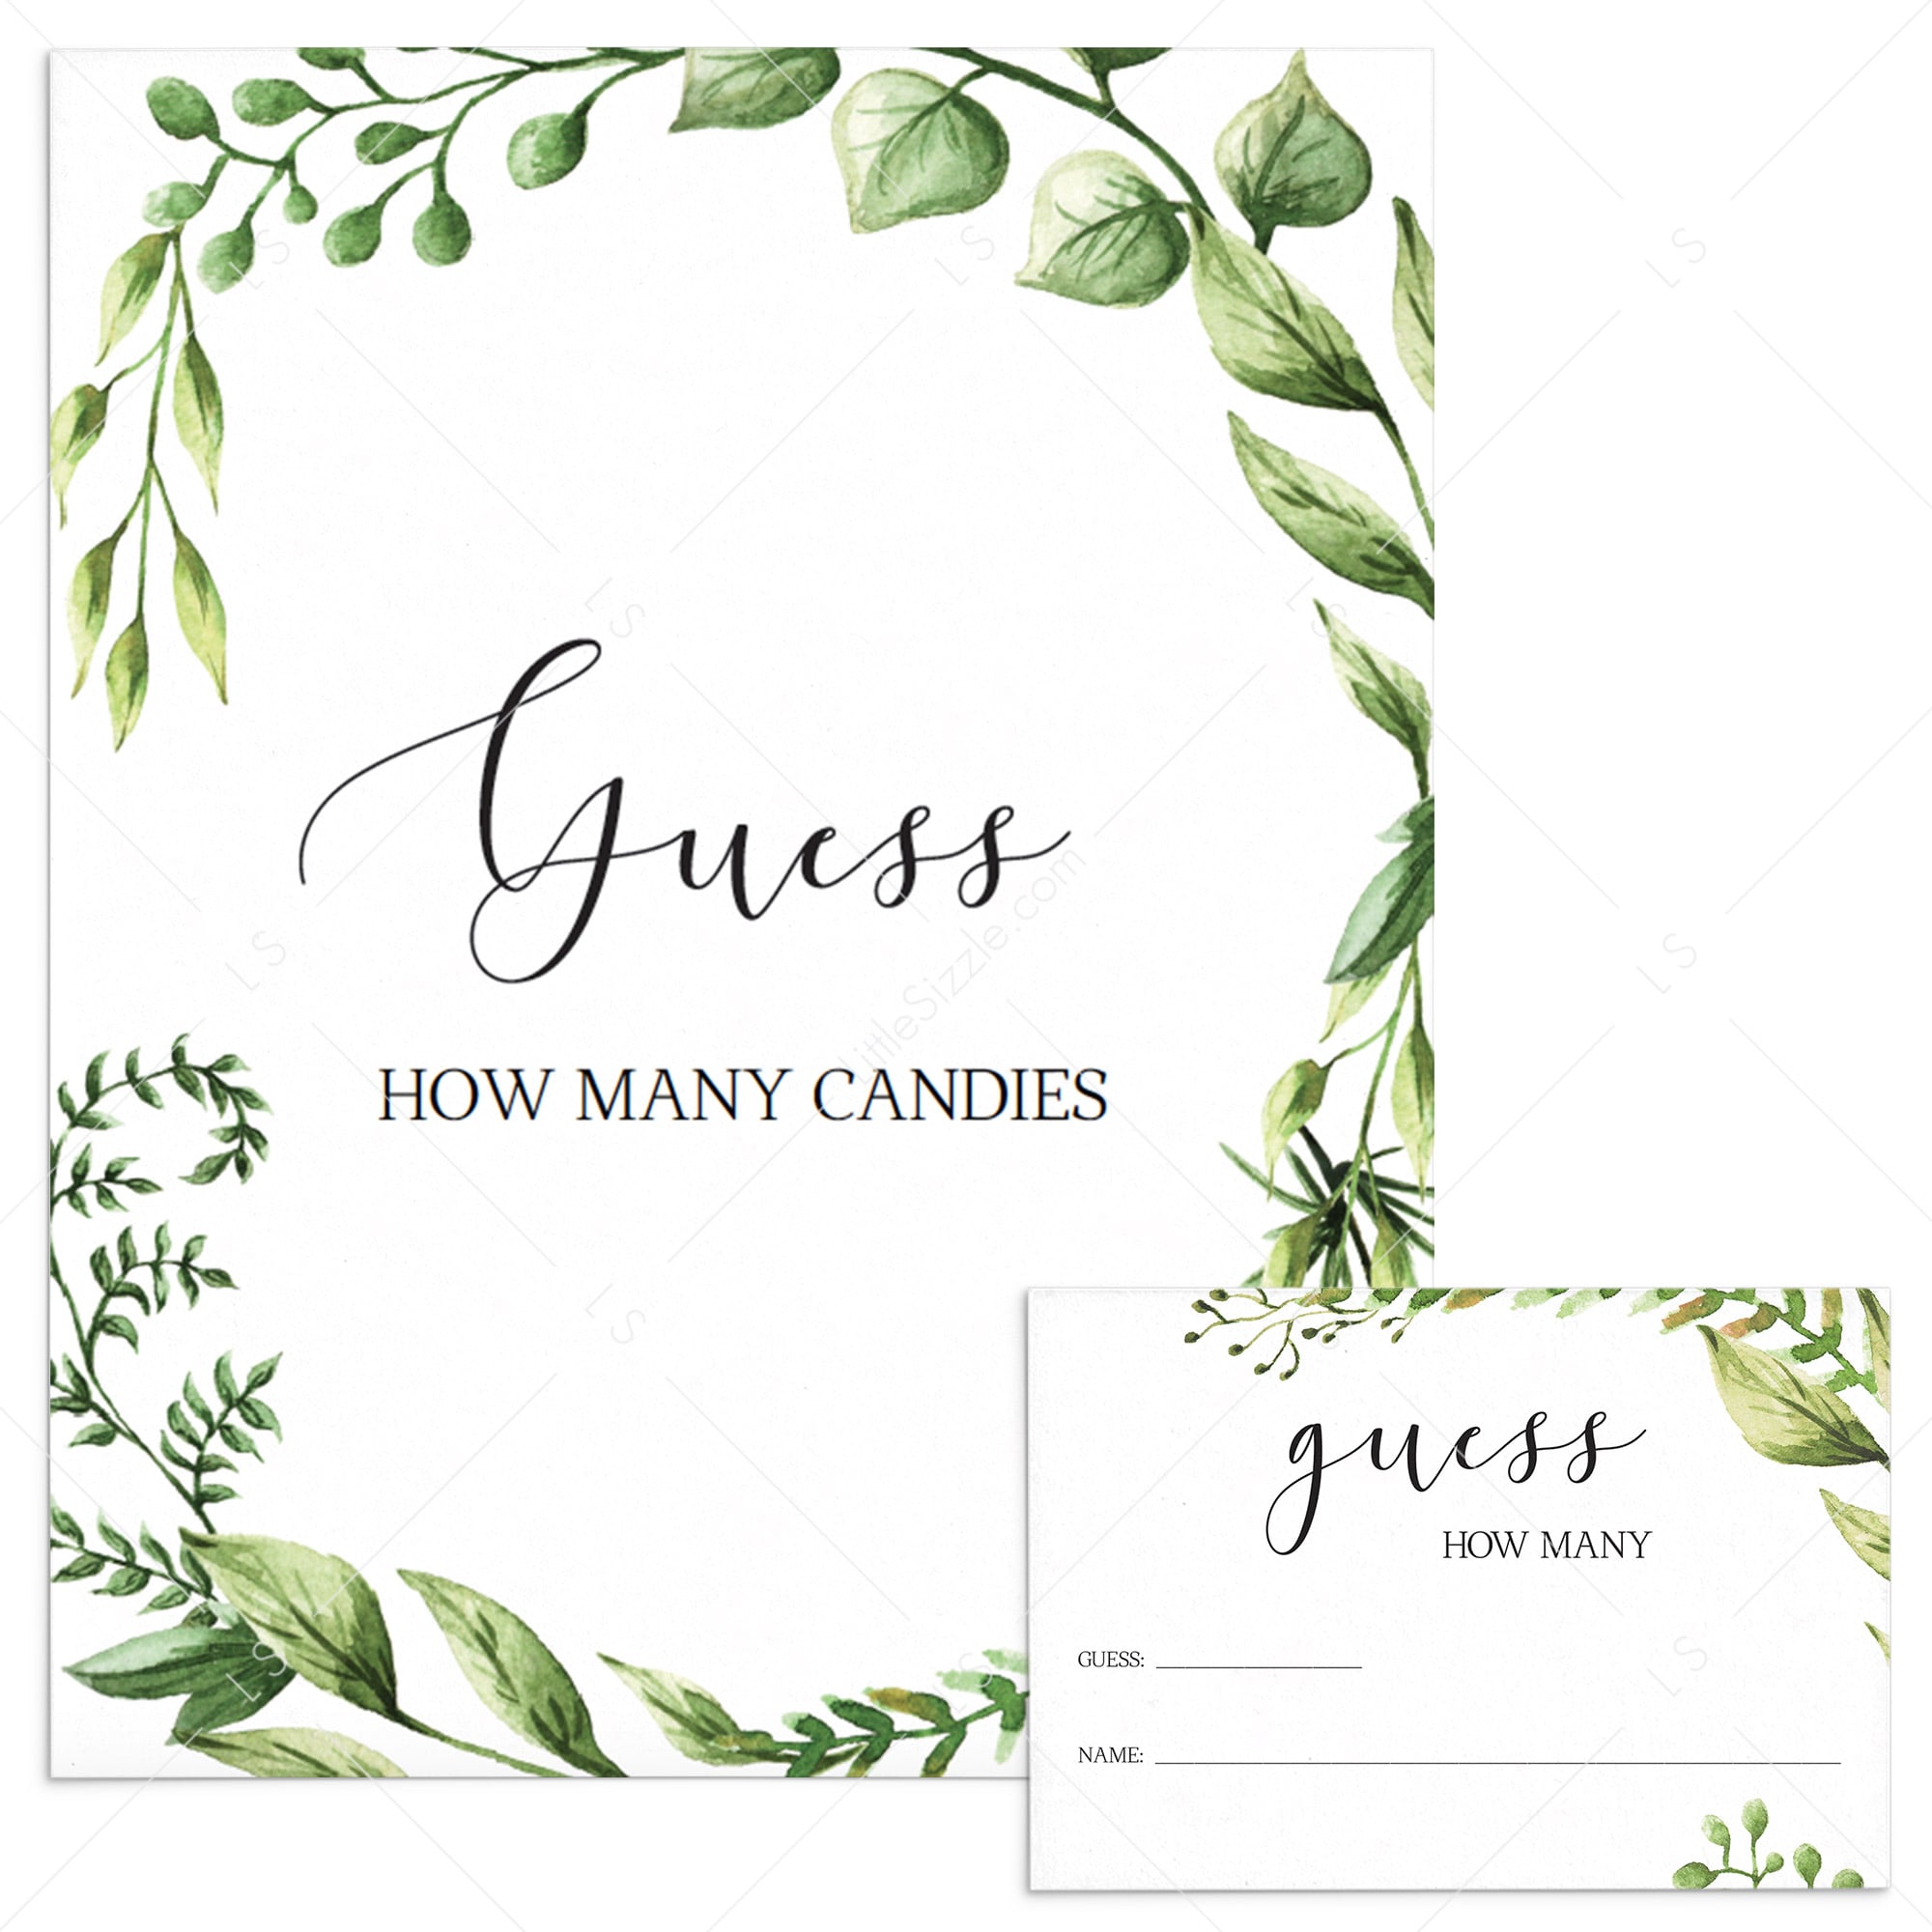 Guess how many baby shower game sign and cards printable by LittleSizzle